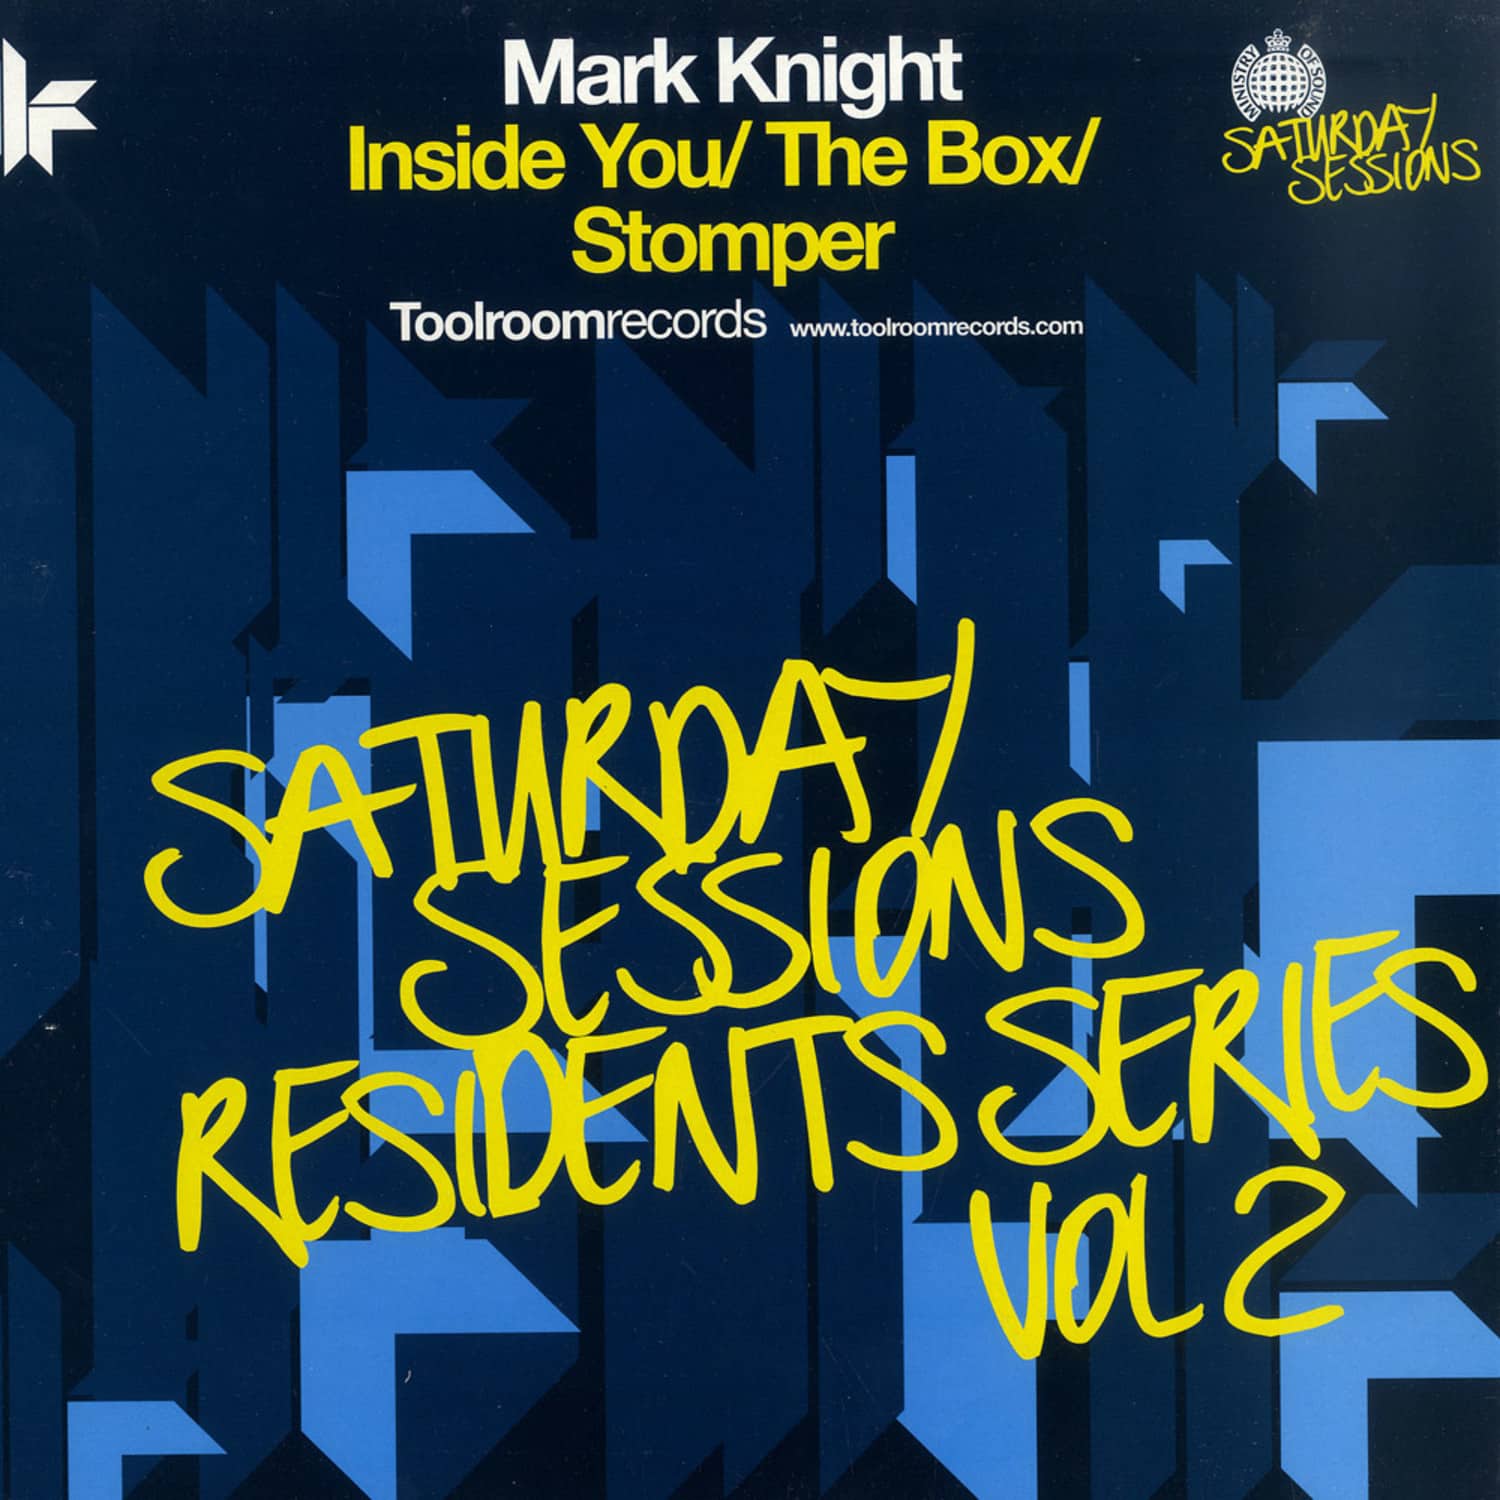 Mark Knight - SATURDAY SESSIONS RESIDENTS SERIES VOL2